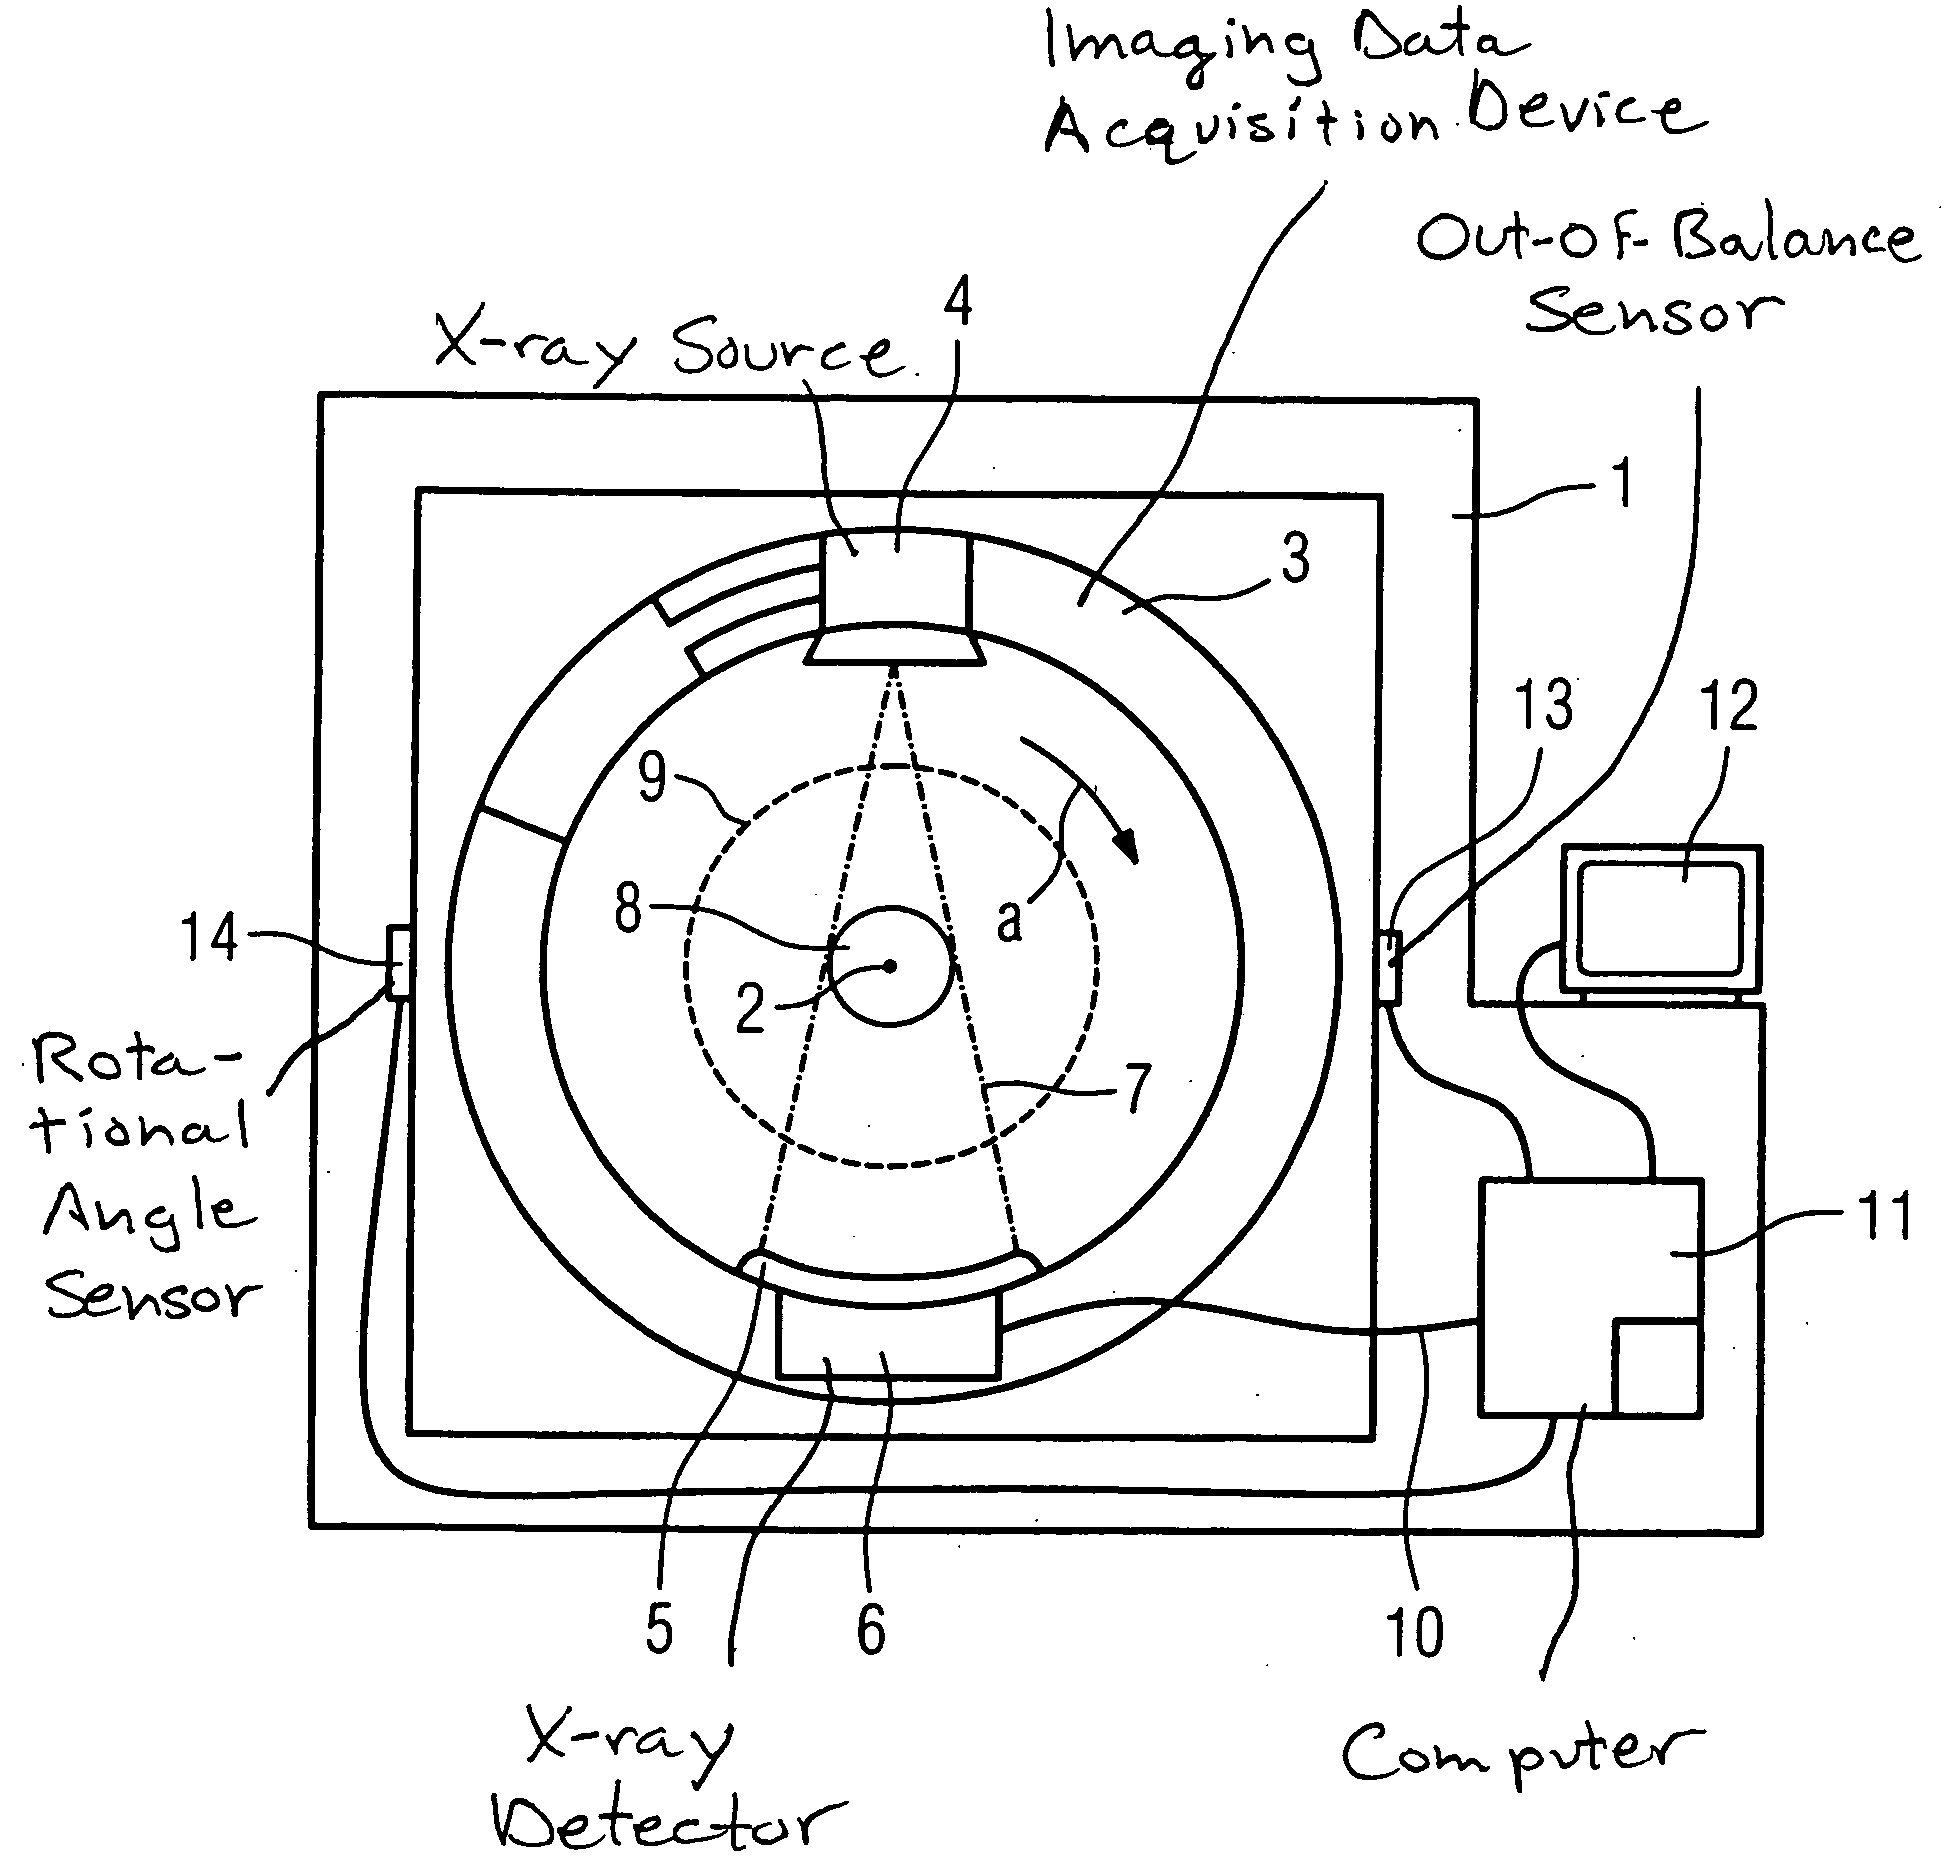 Imaging tomography apparatus with fluid-containing chambers forming out-of-balance compensating weights for a rotating part